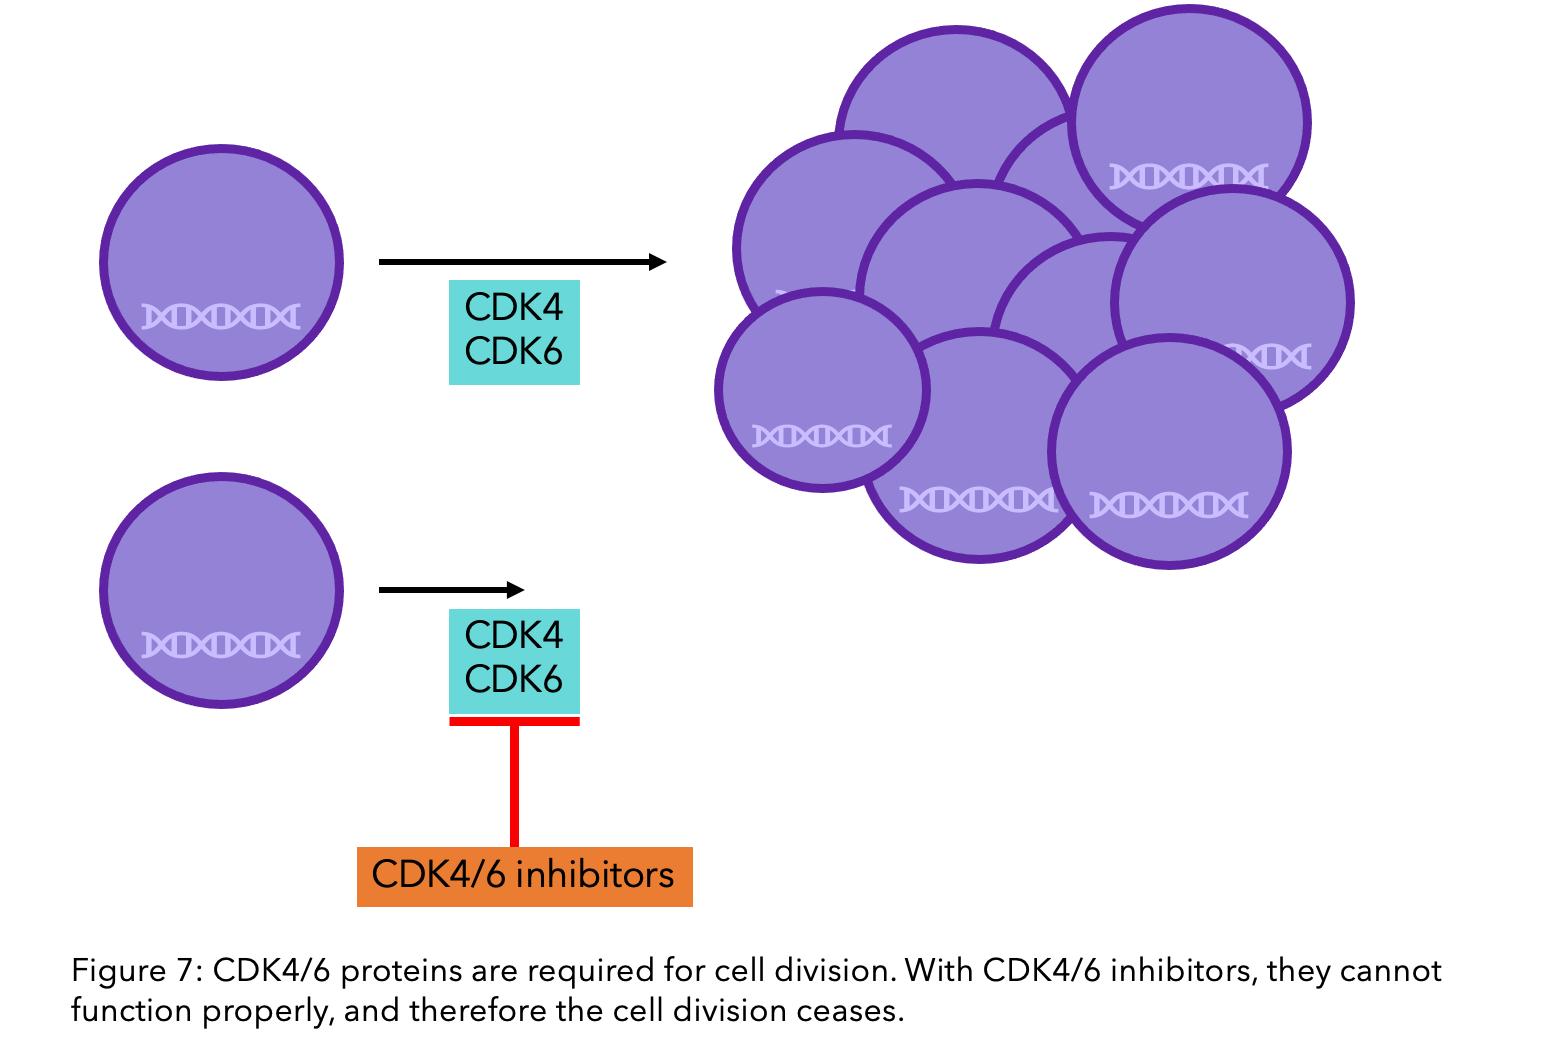 A figure to show CDKR/6 inhibitors impact on hormone therapy resistance